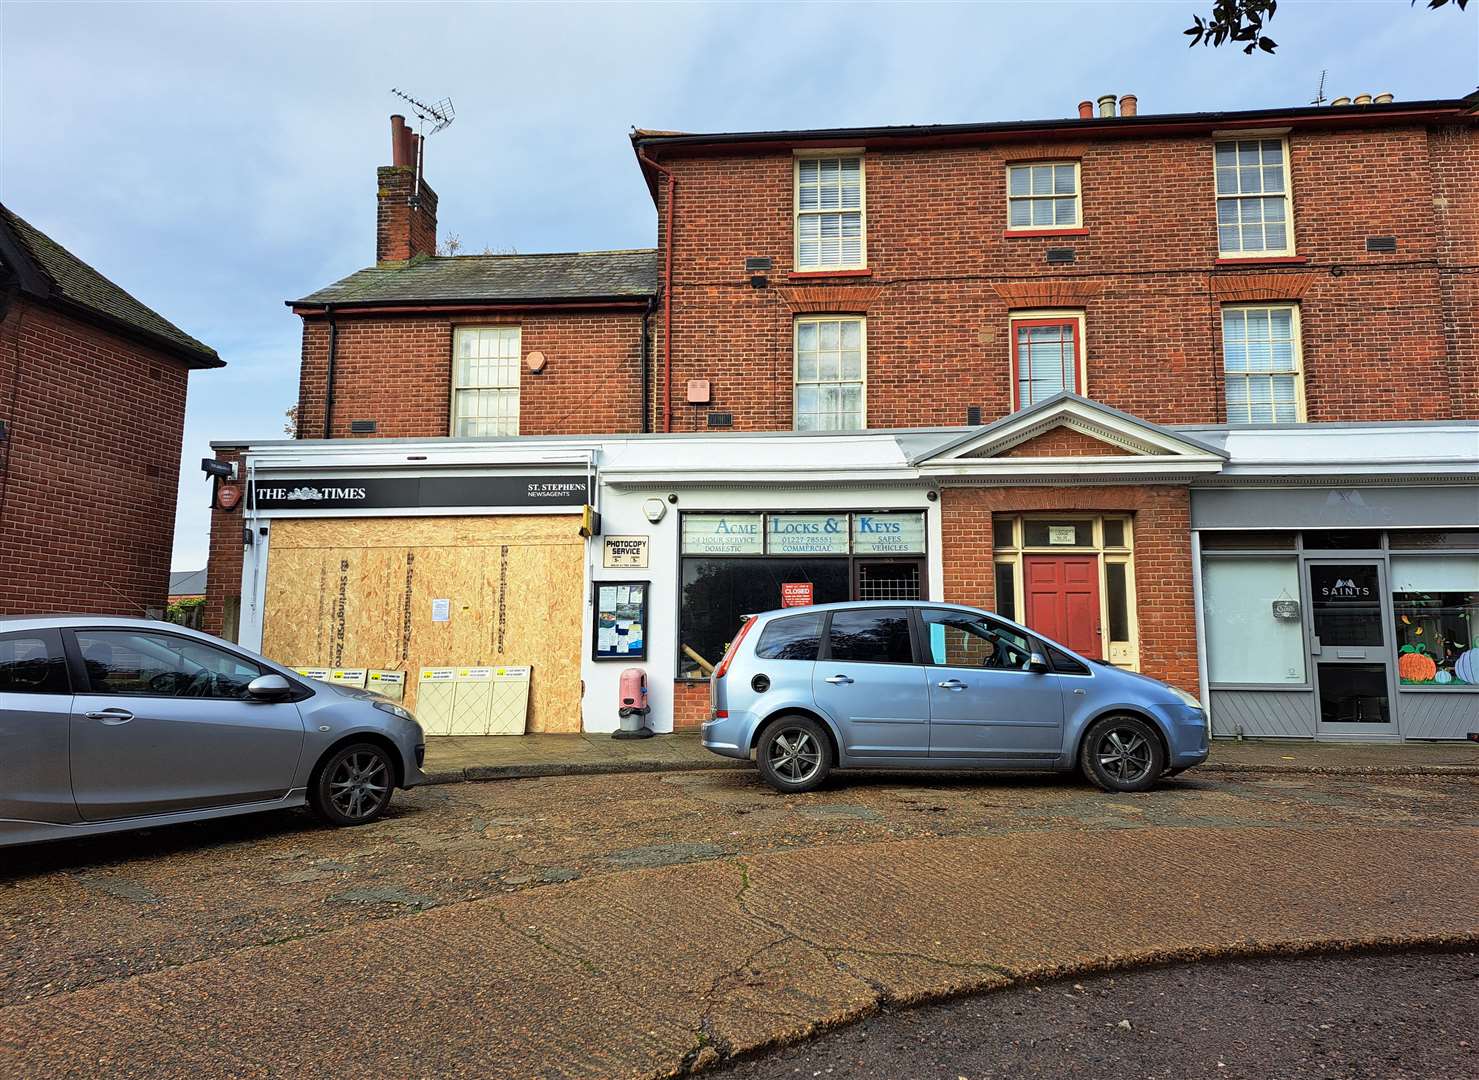 The shop was boarded up and closed while repairs were made following the raid in October